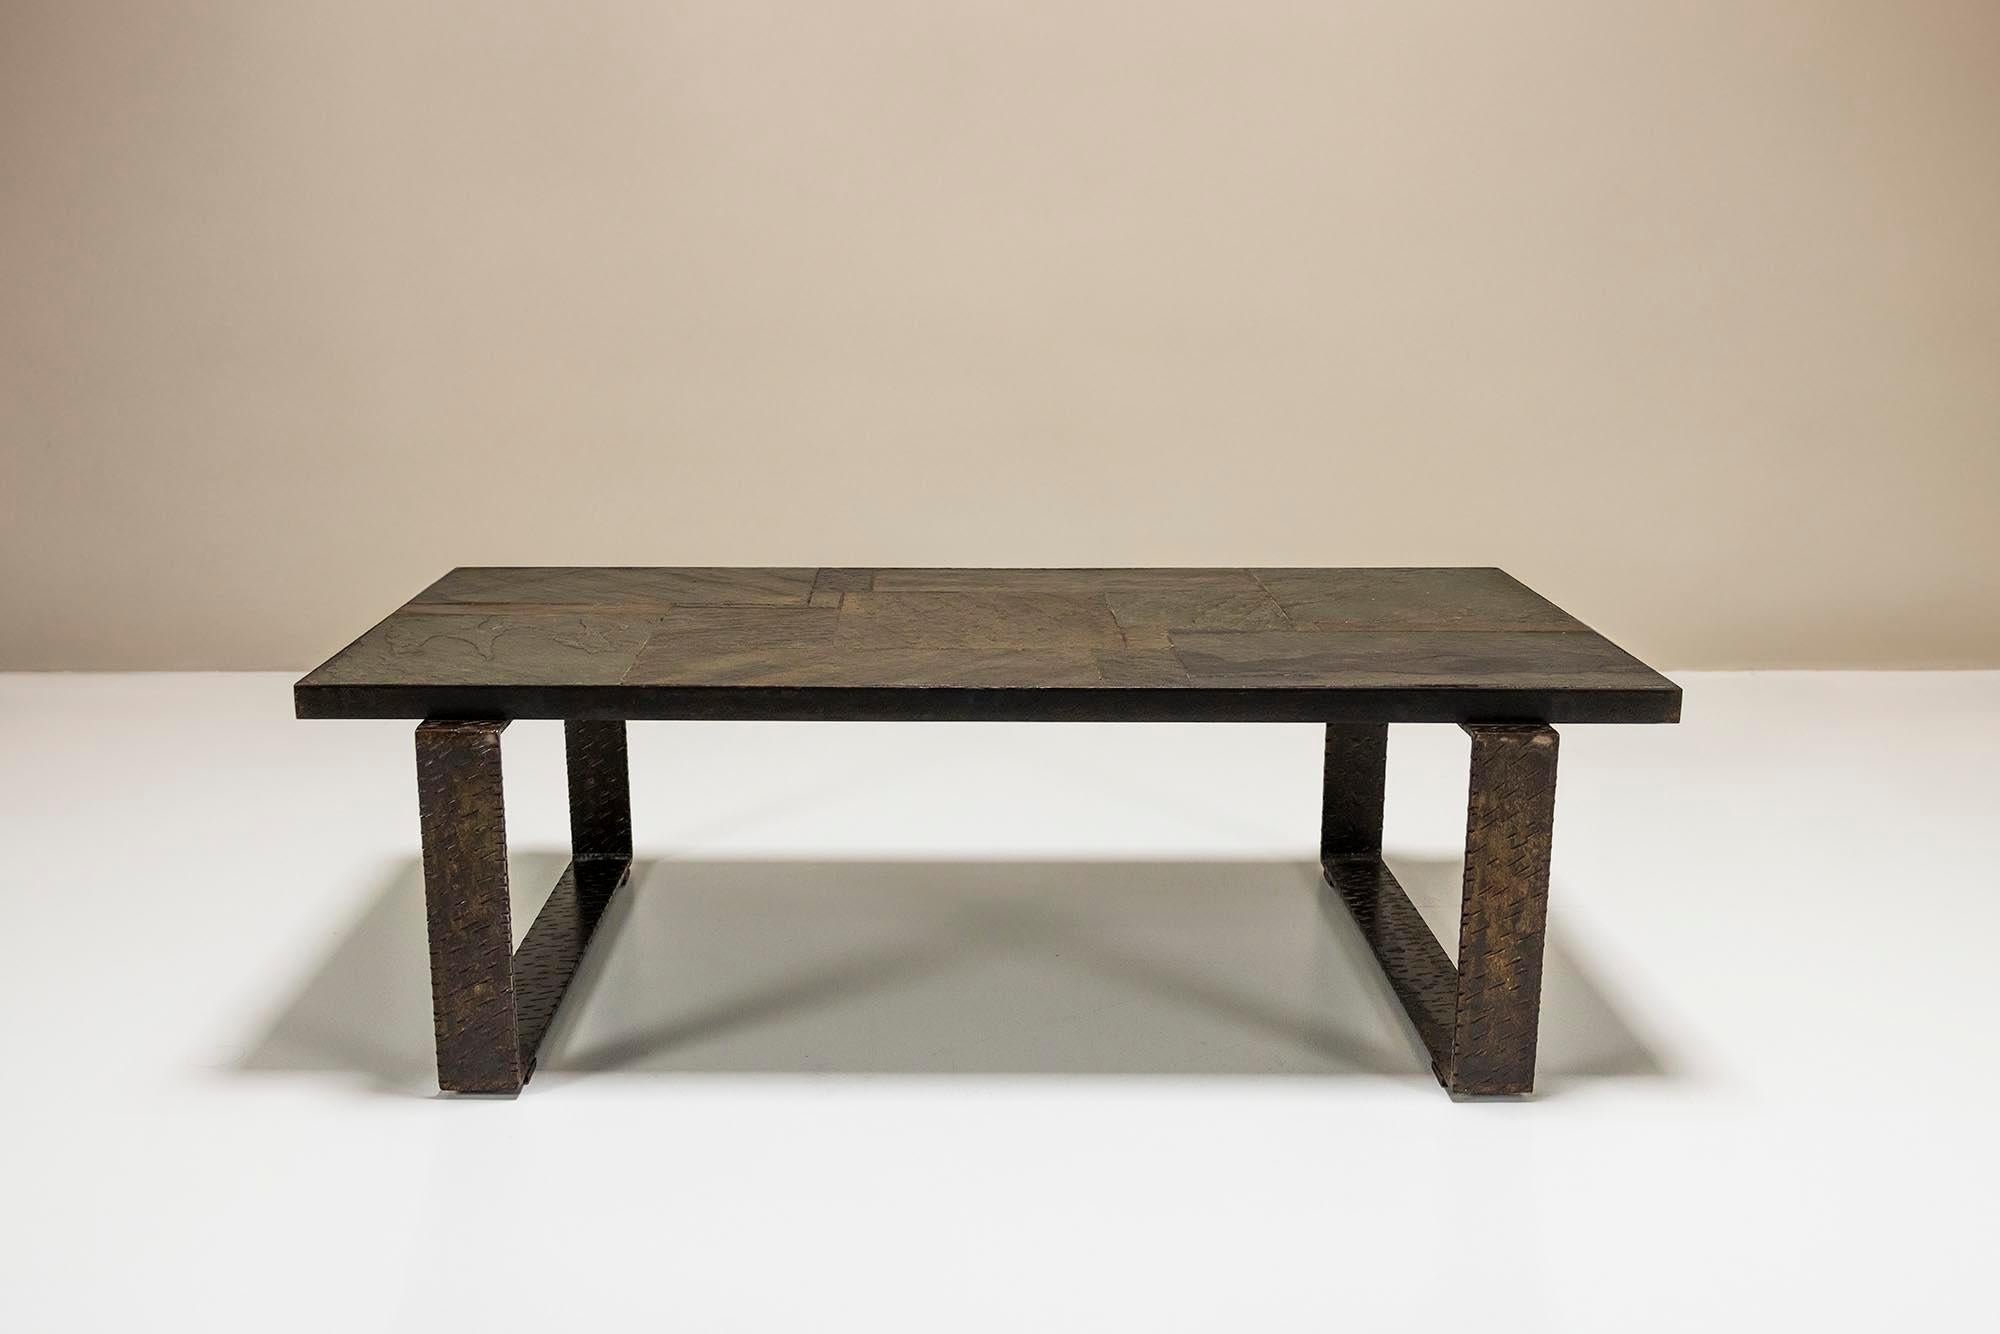 Dutch Paul Kingma Brutalist Coffee Table In Stone And Hammered Metal, Netherlands 1960 For Sale